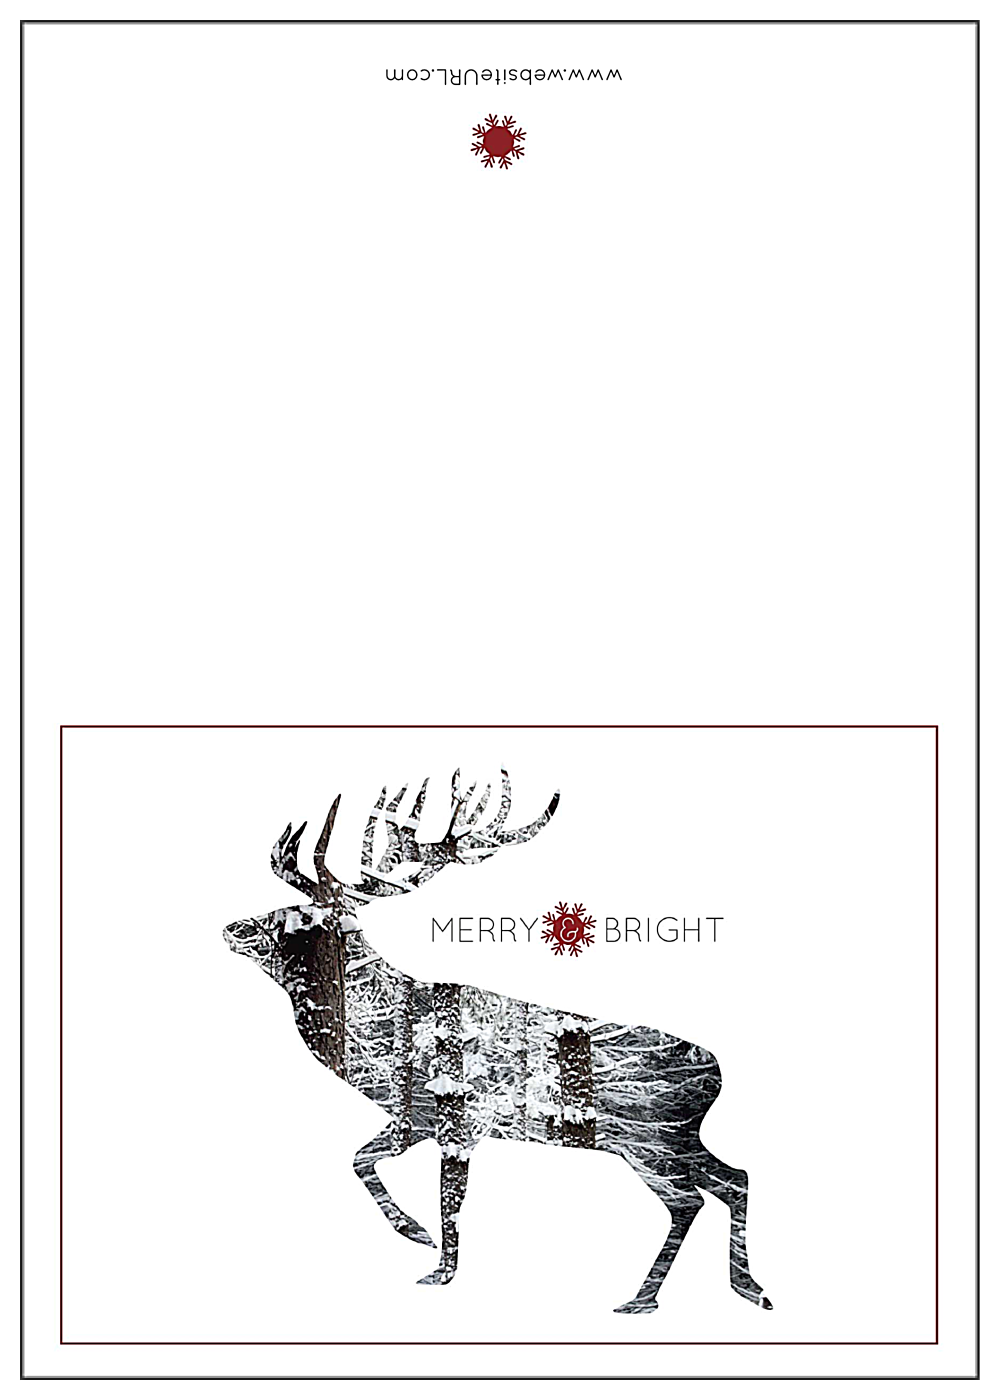 Snowy Reindeer front - Greeting Cards Maker